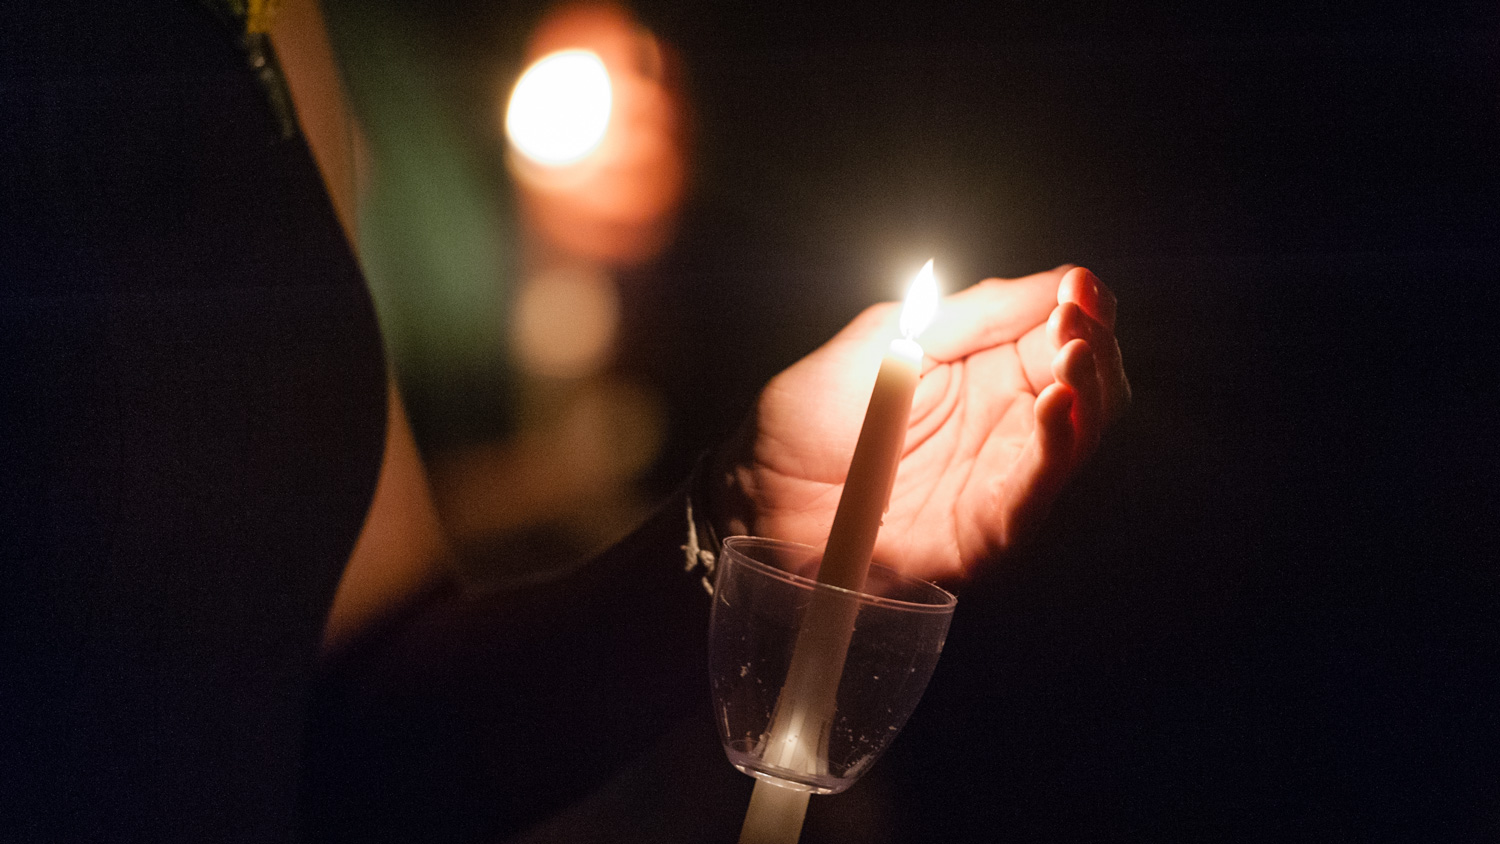 a hand shields the flame of a candle